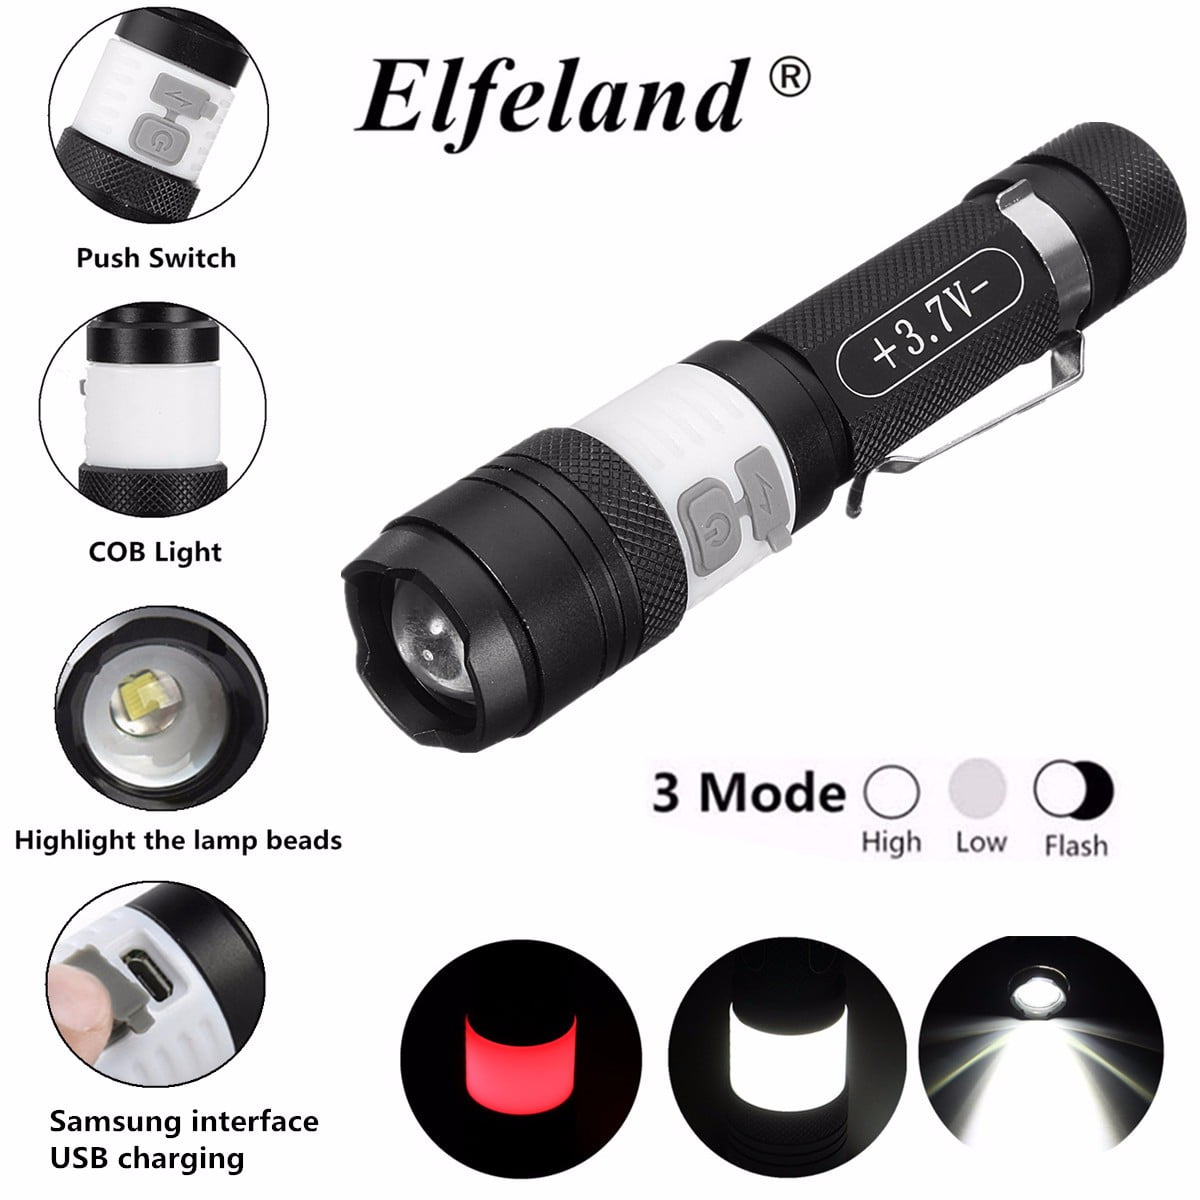 300000LM T6 LED ZOOM Rechargeable High Power Torch Flashlight Lamp Light&Charger 